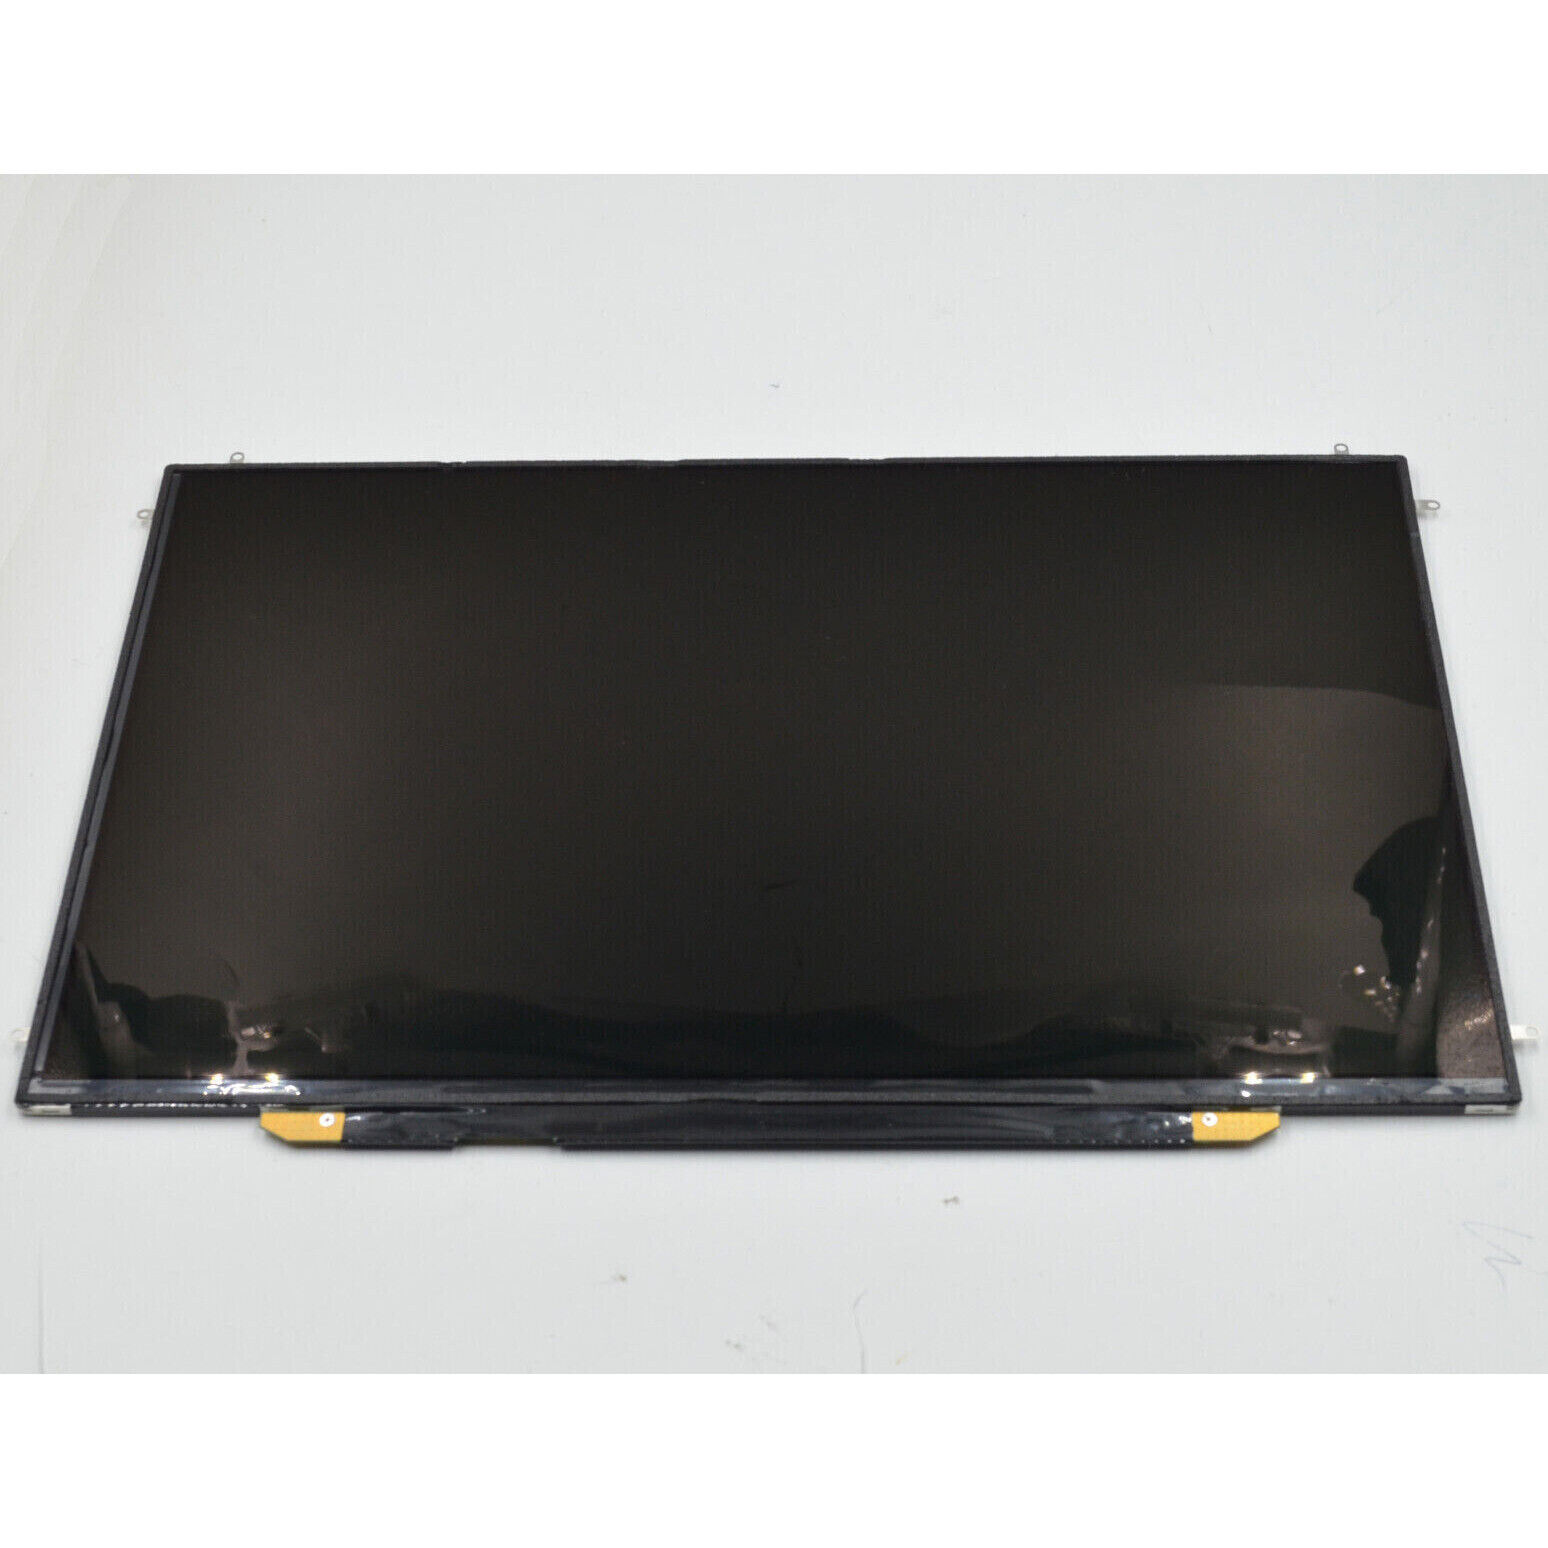 Genuine Grade A LCD LED Screen Panel Display For Macbook Pro 15